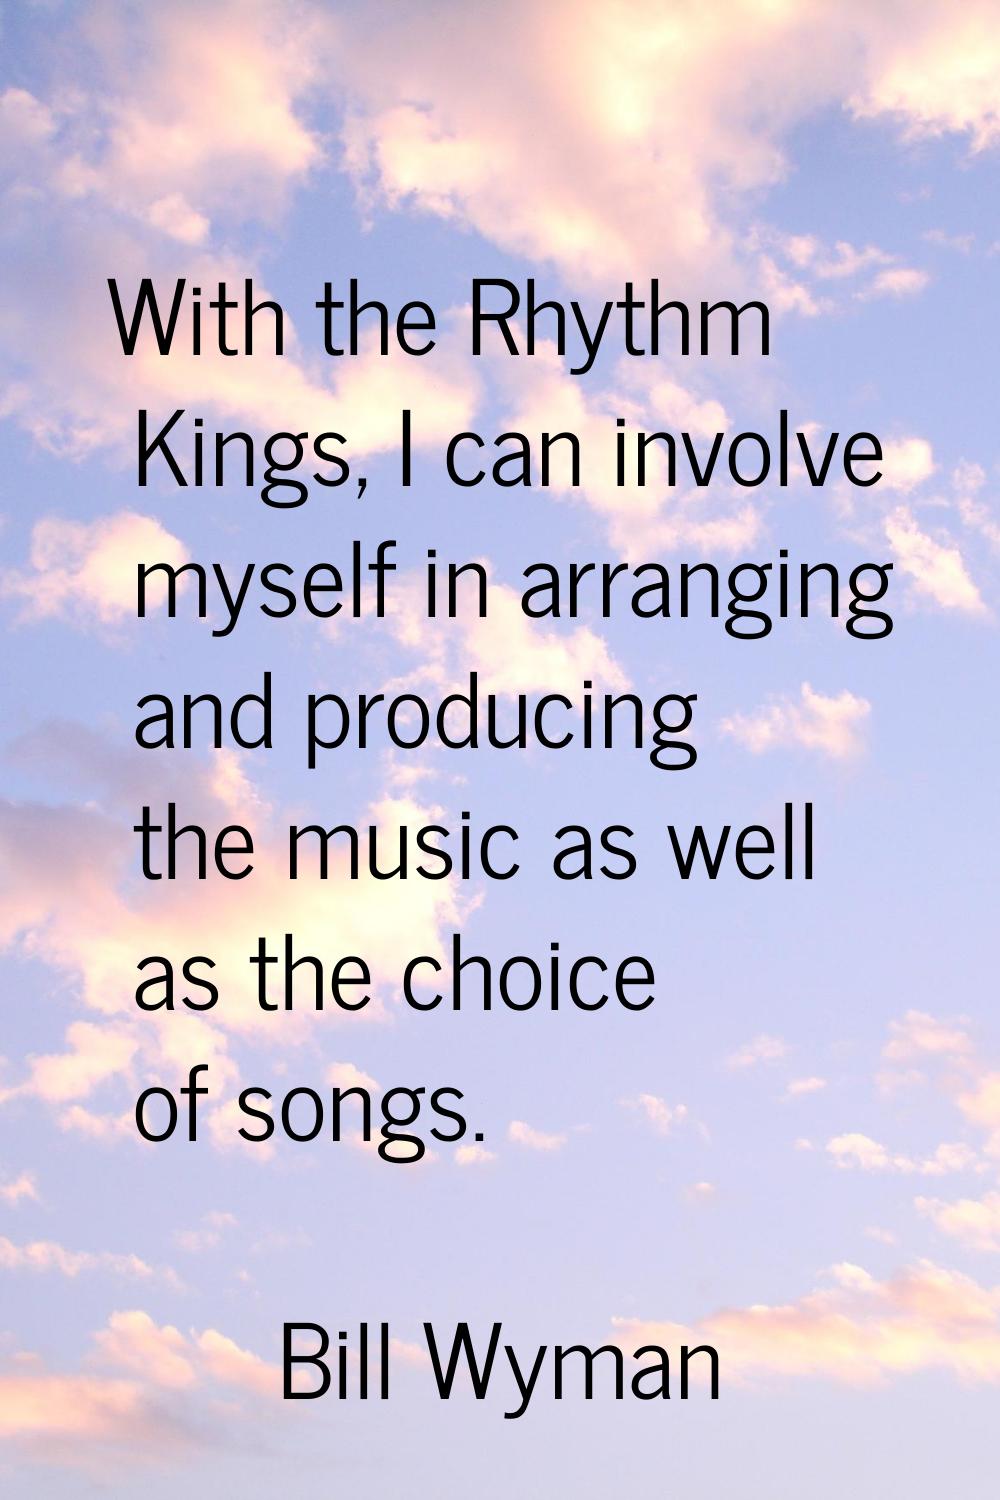 With the Rhythm Kings, I can involve myself in arranging and producing the music as well as the cho